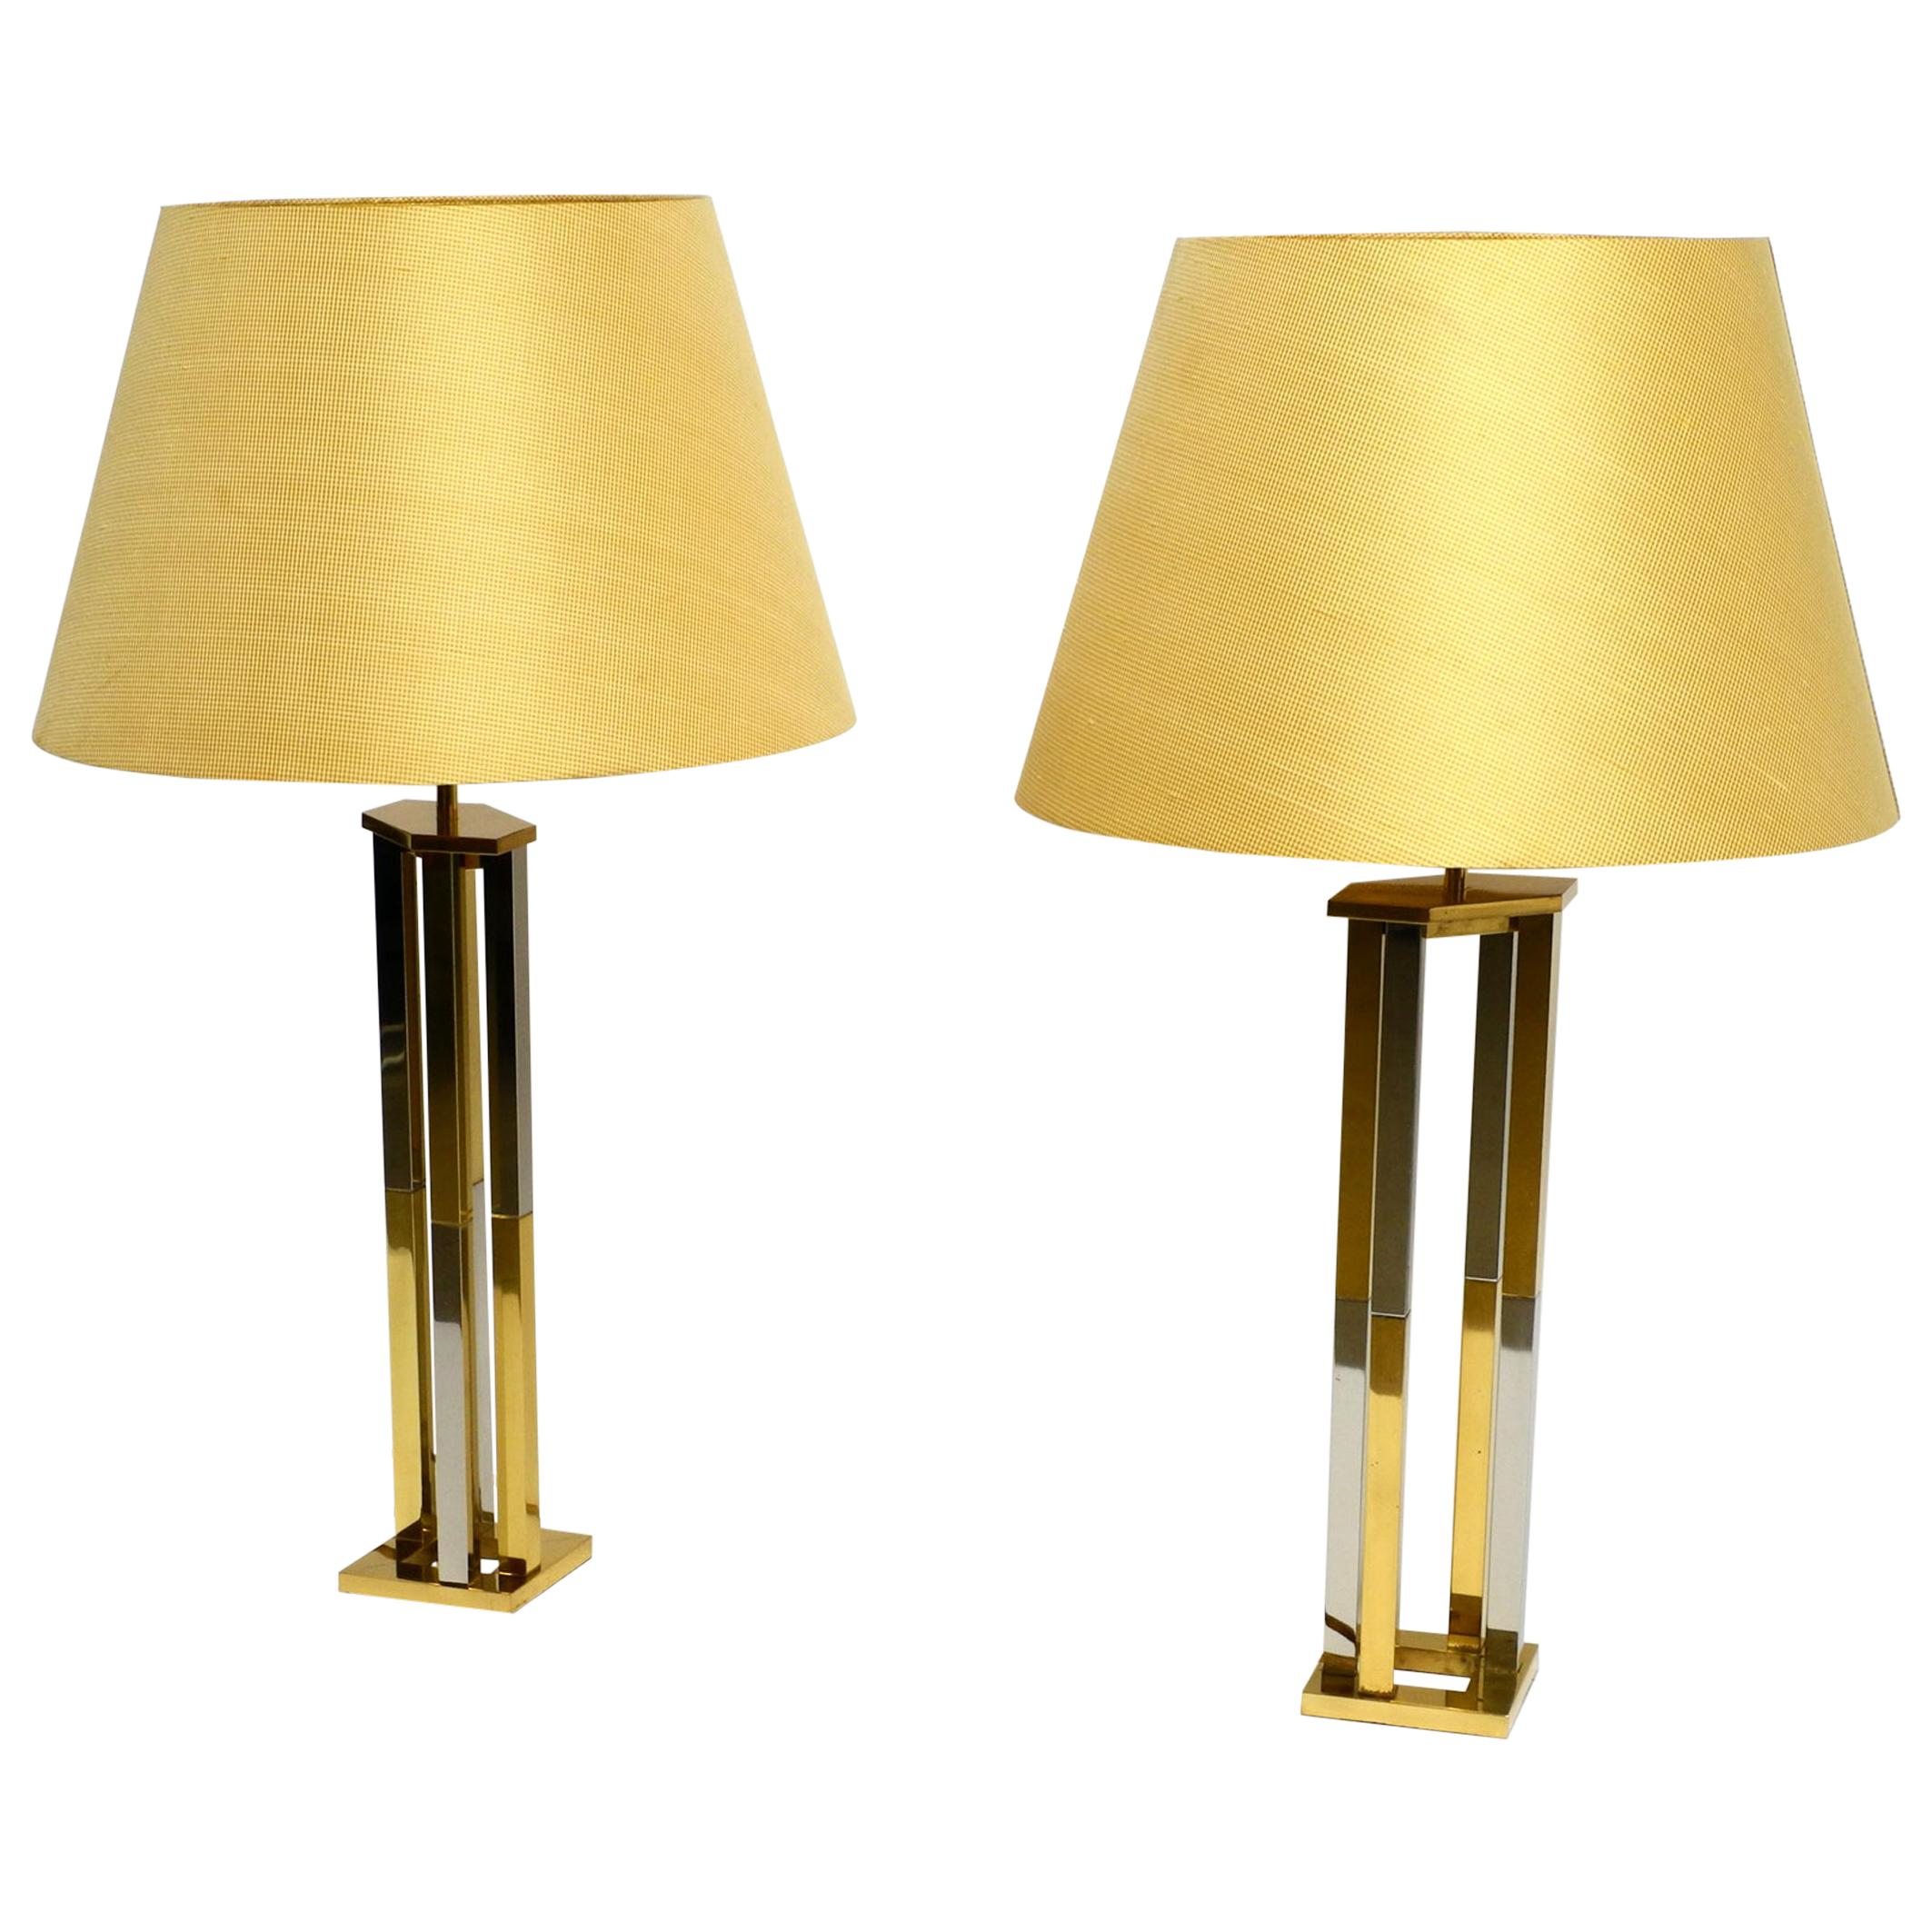 Pair of Very Rare Extra Large Brass Table Lamps from Vereinigte Werkstätten For Sale